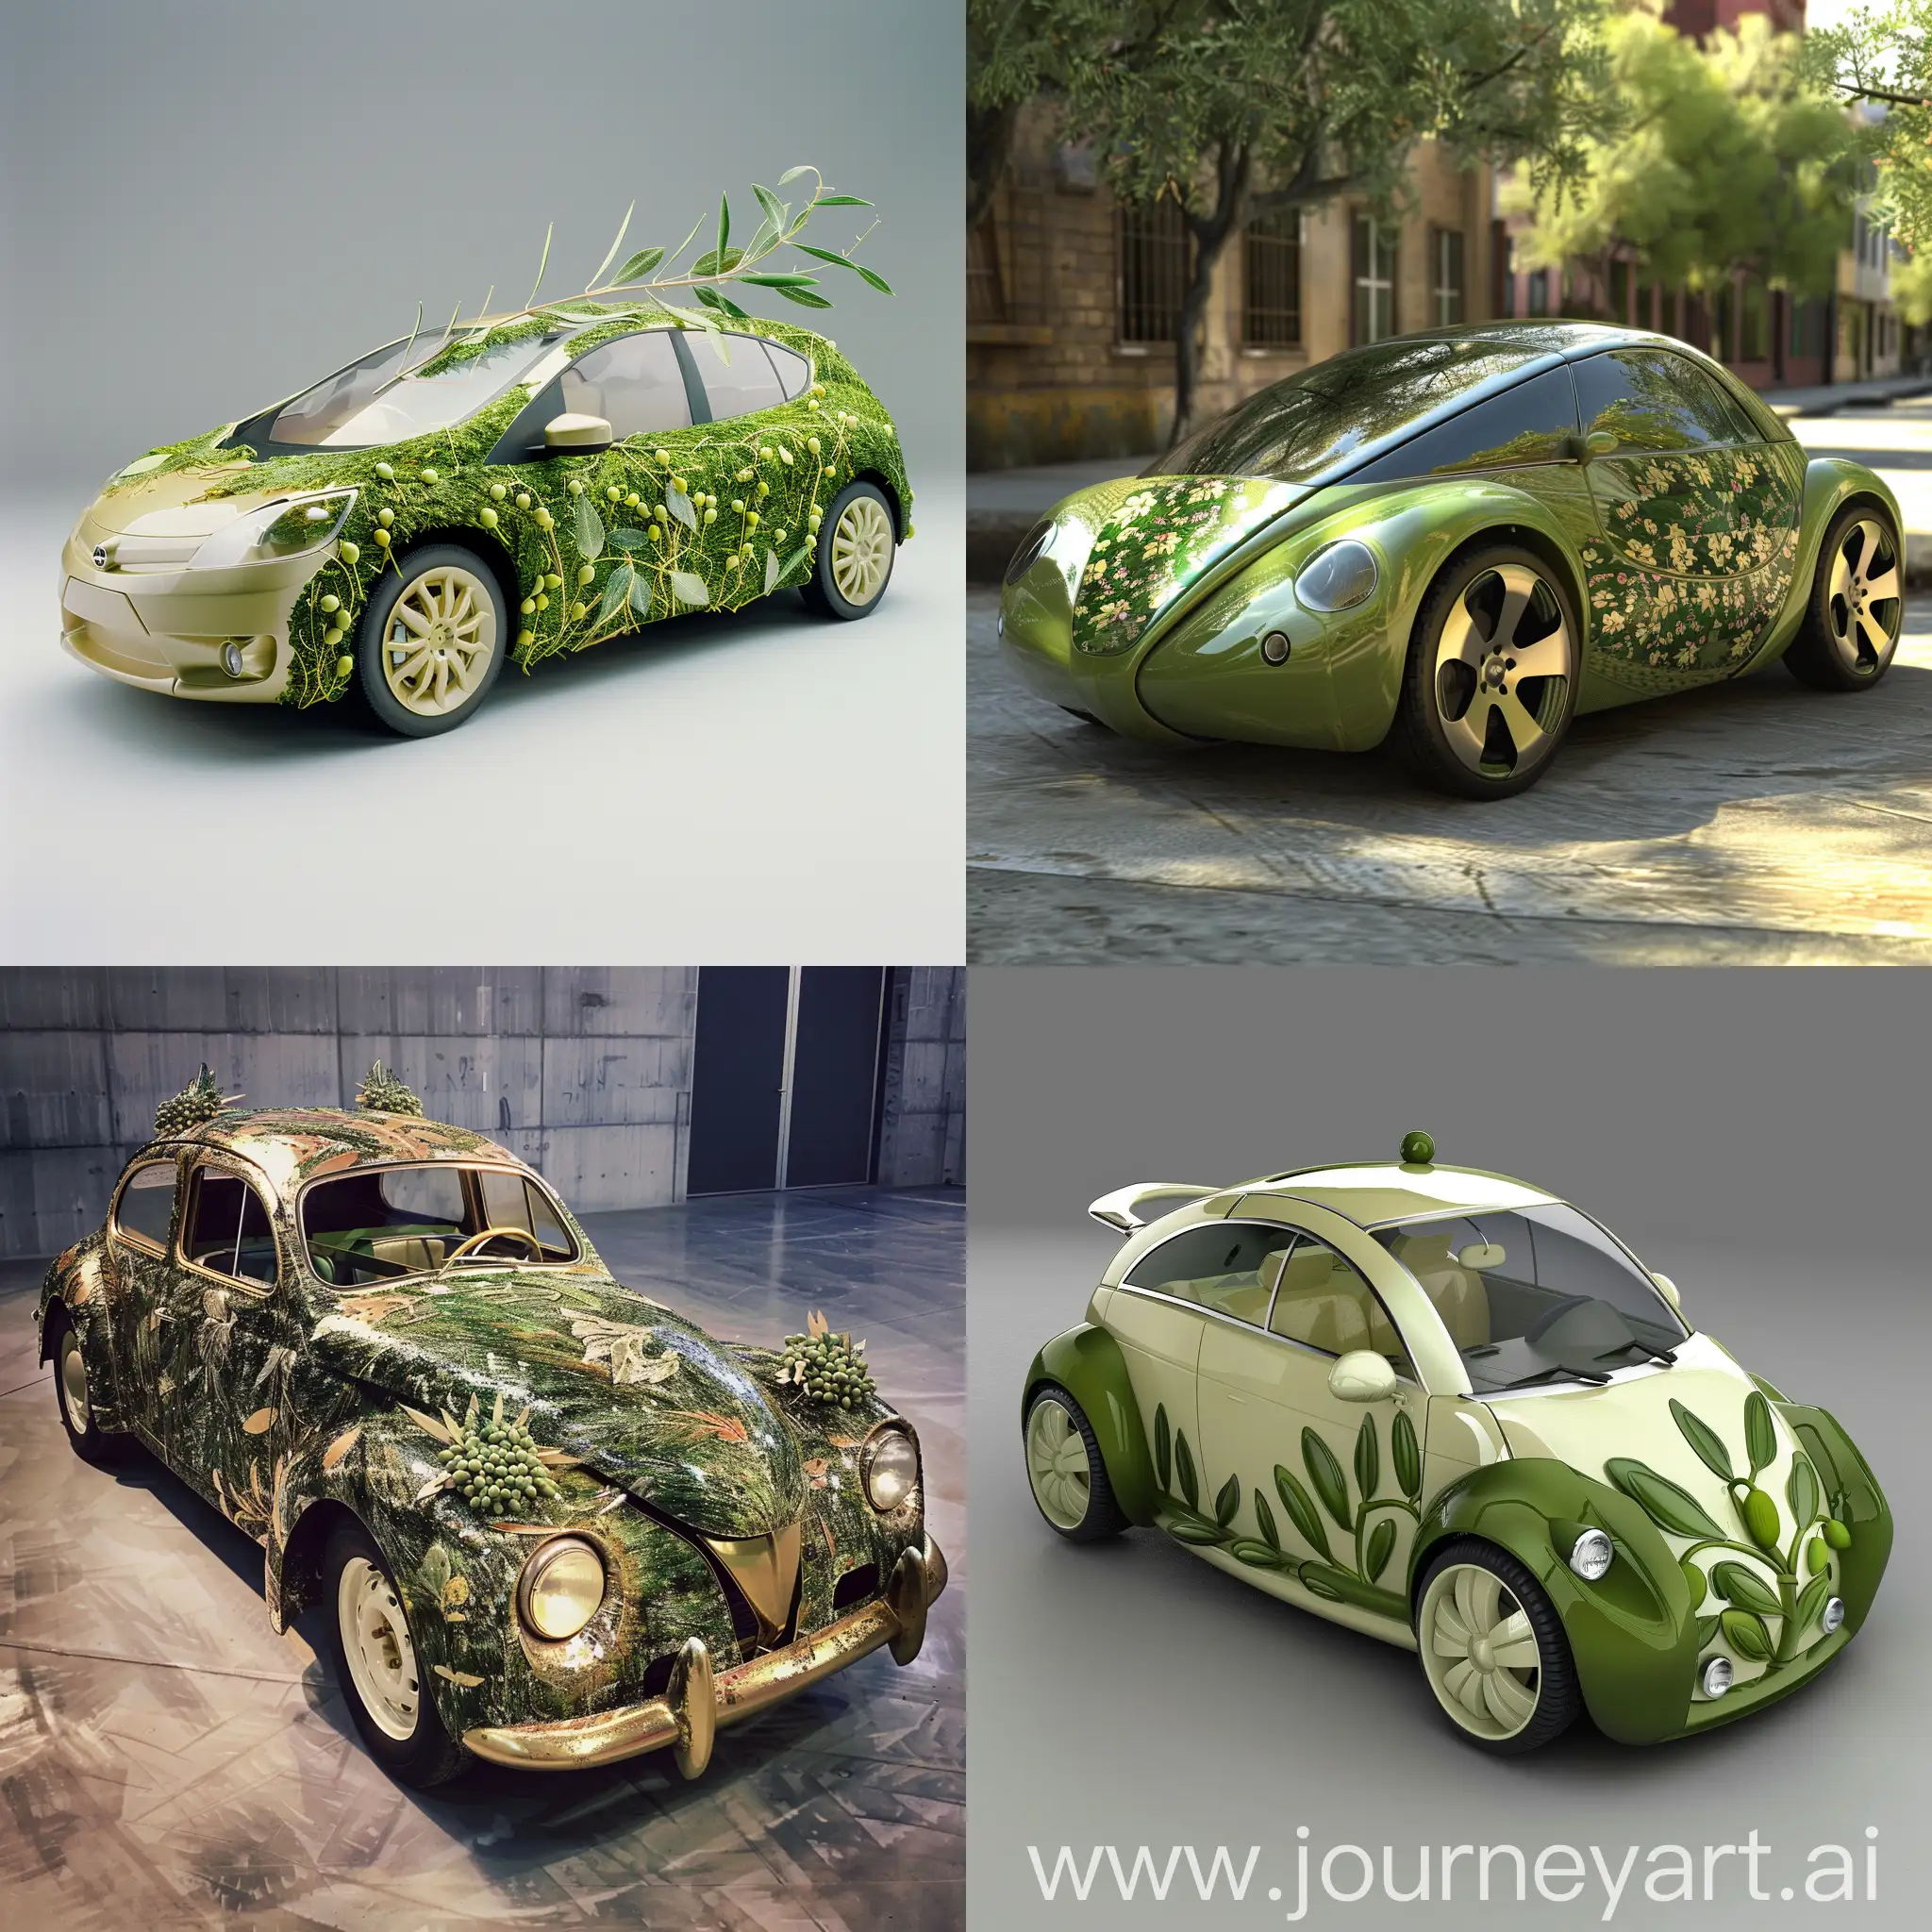 A car powered by olive oil